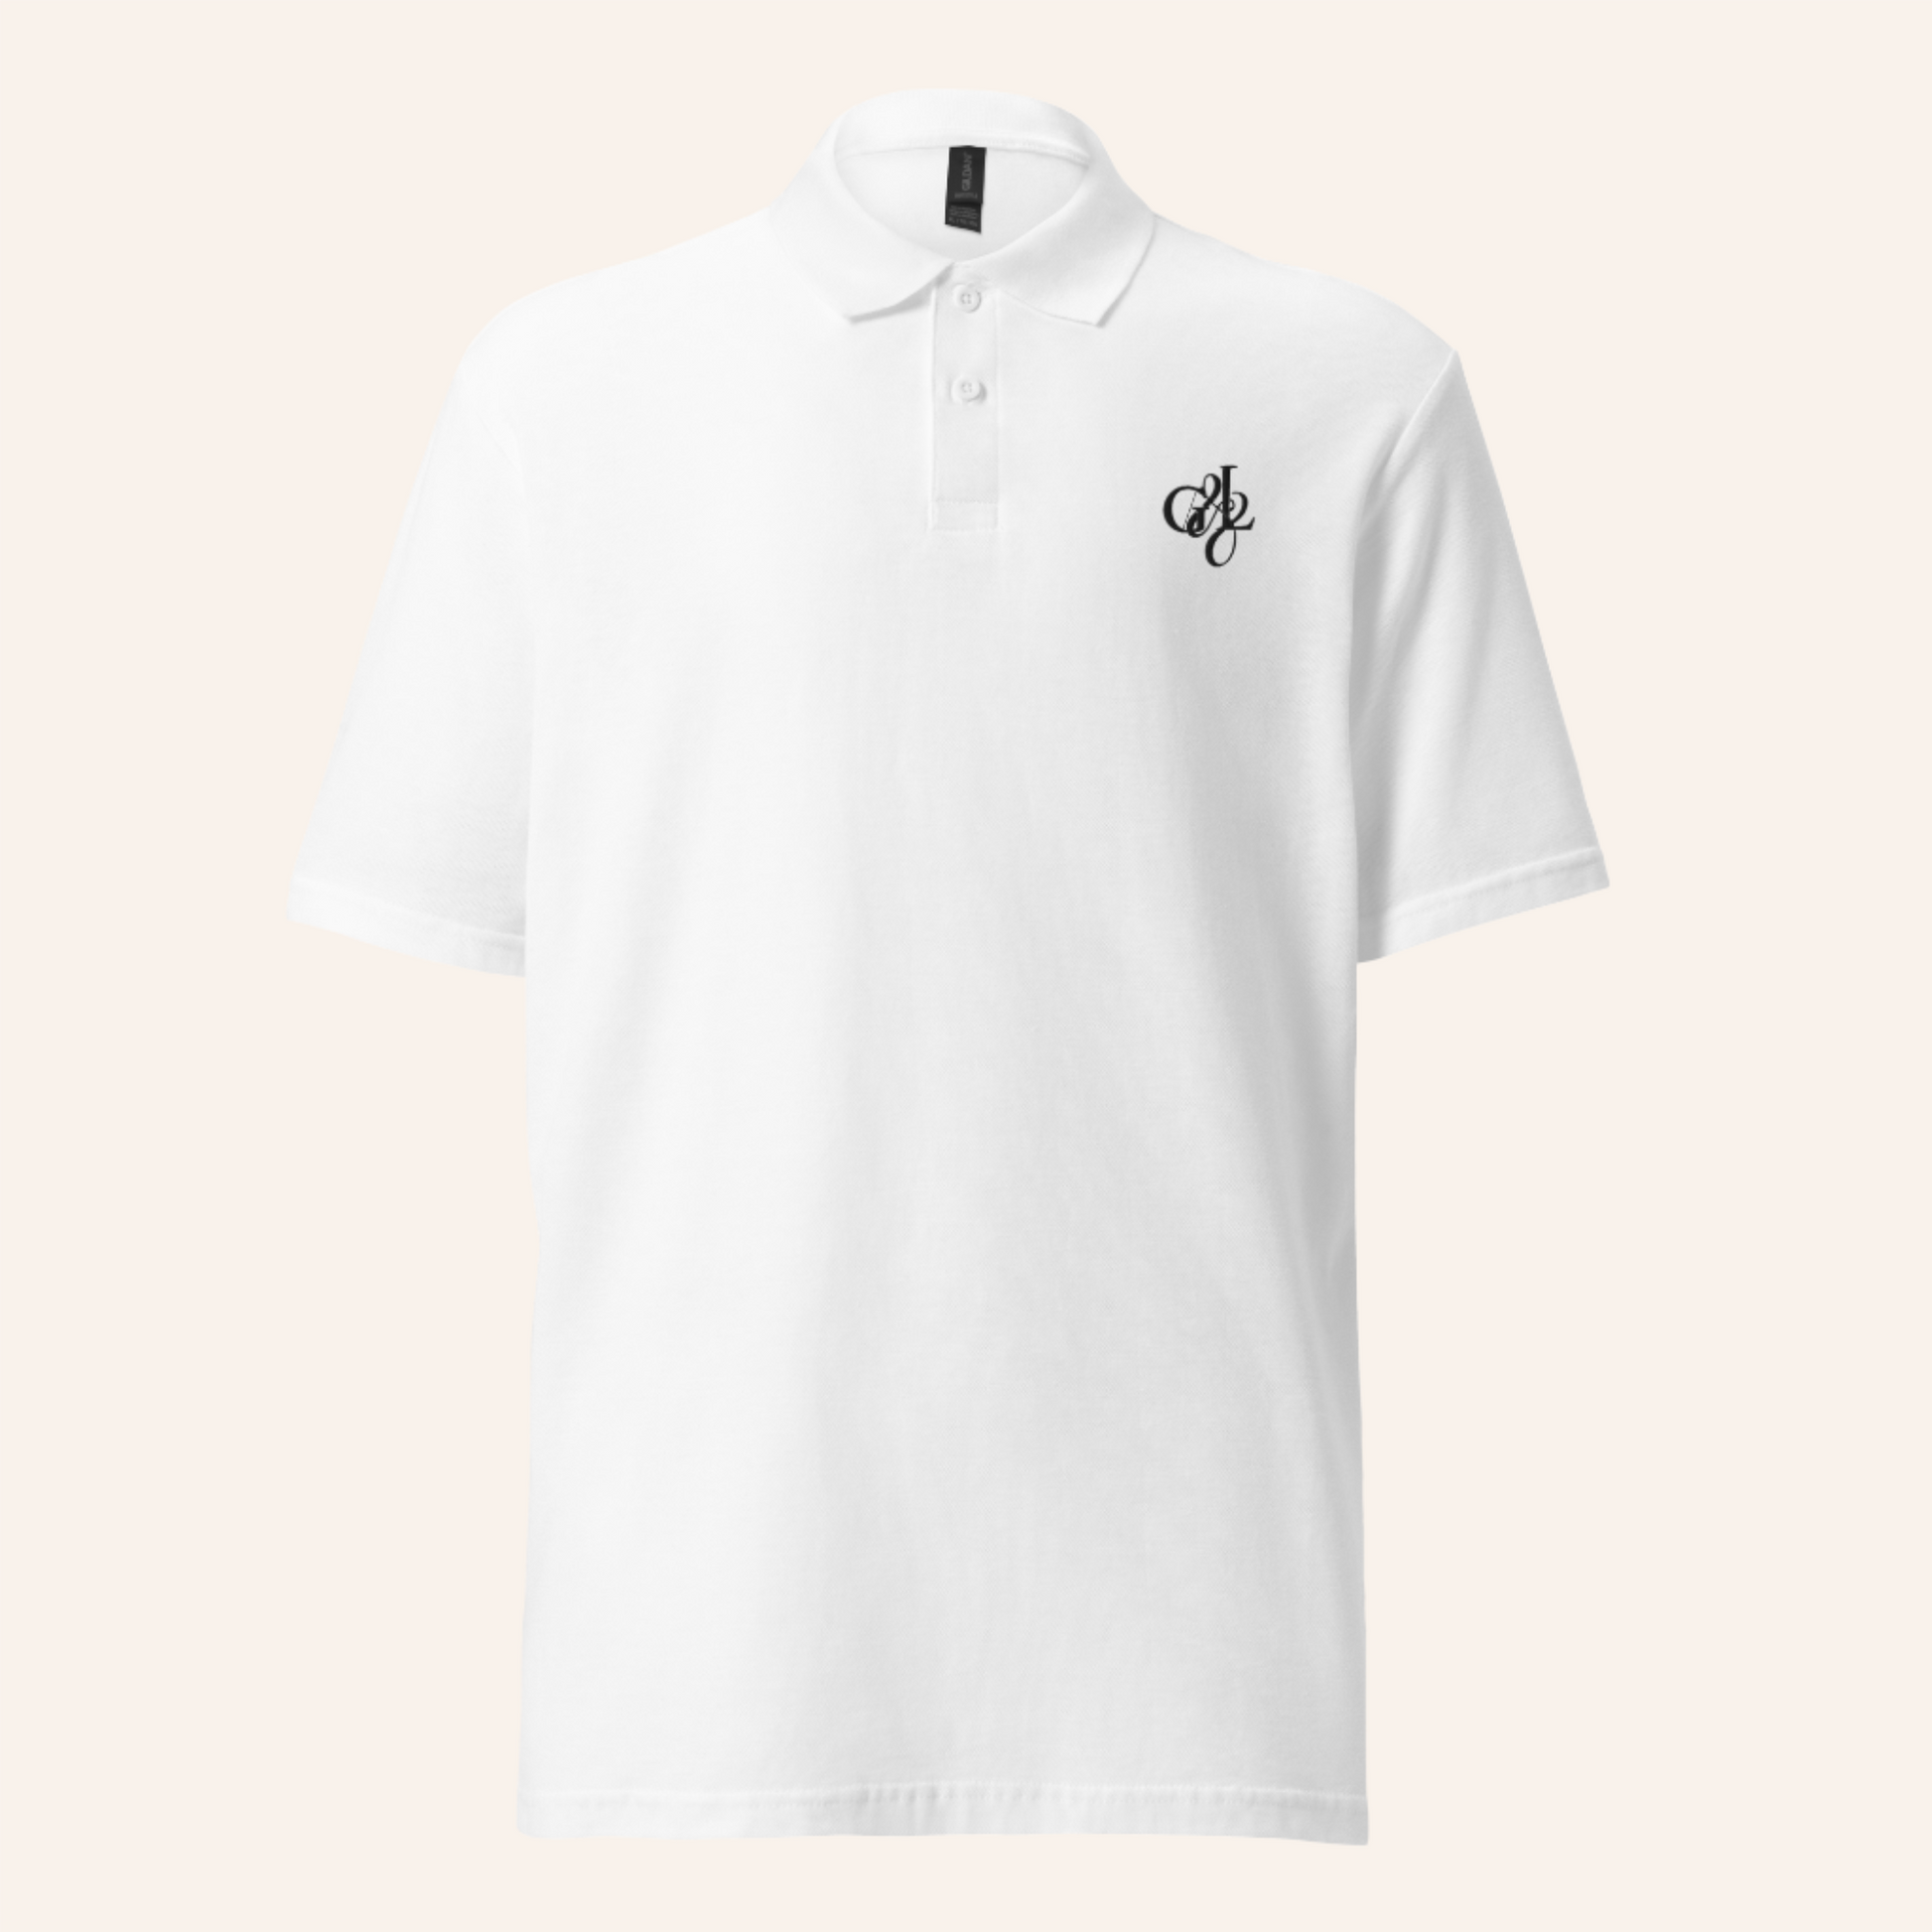 Introducing our White Polo T-shirt with a sleek black G&L logo. This classic combination of colors exudes timeless elegance and sophistication. Perfect for any occasion, whether it's a casual outing or a semi-formal event, elevate your style with G&L Fashion Brand.